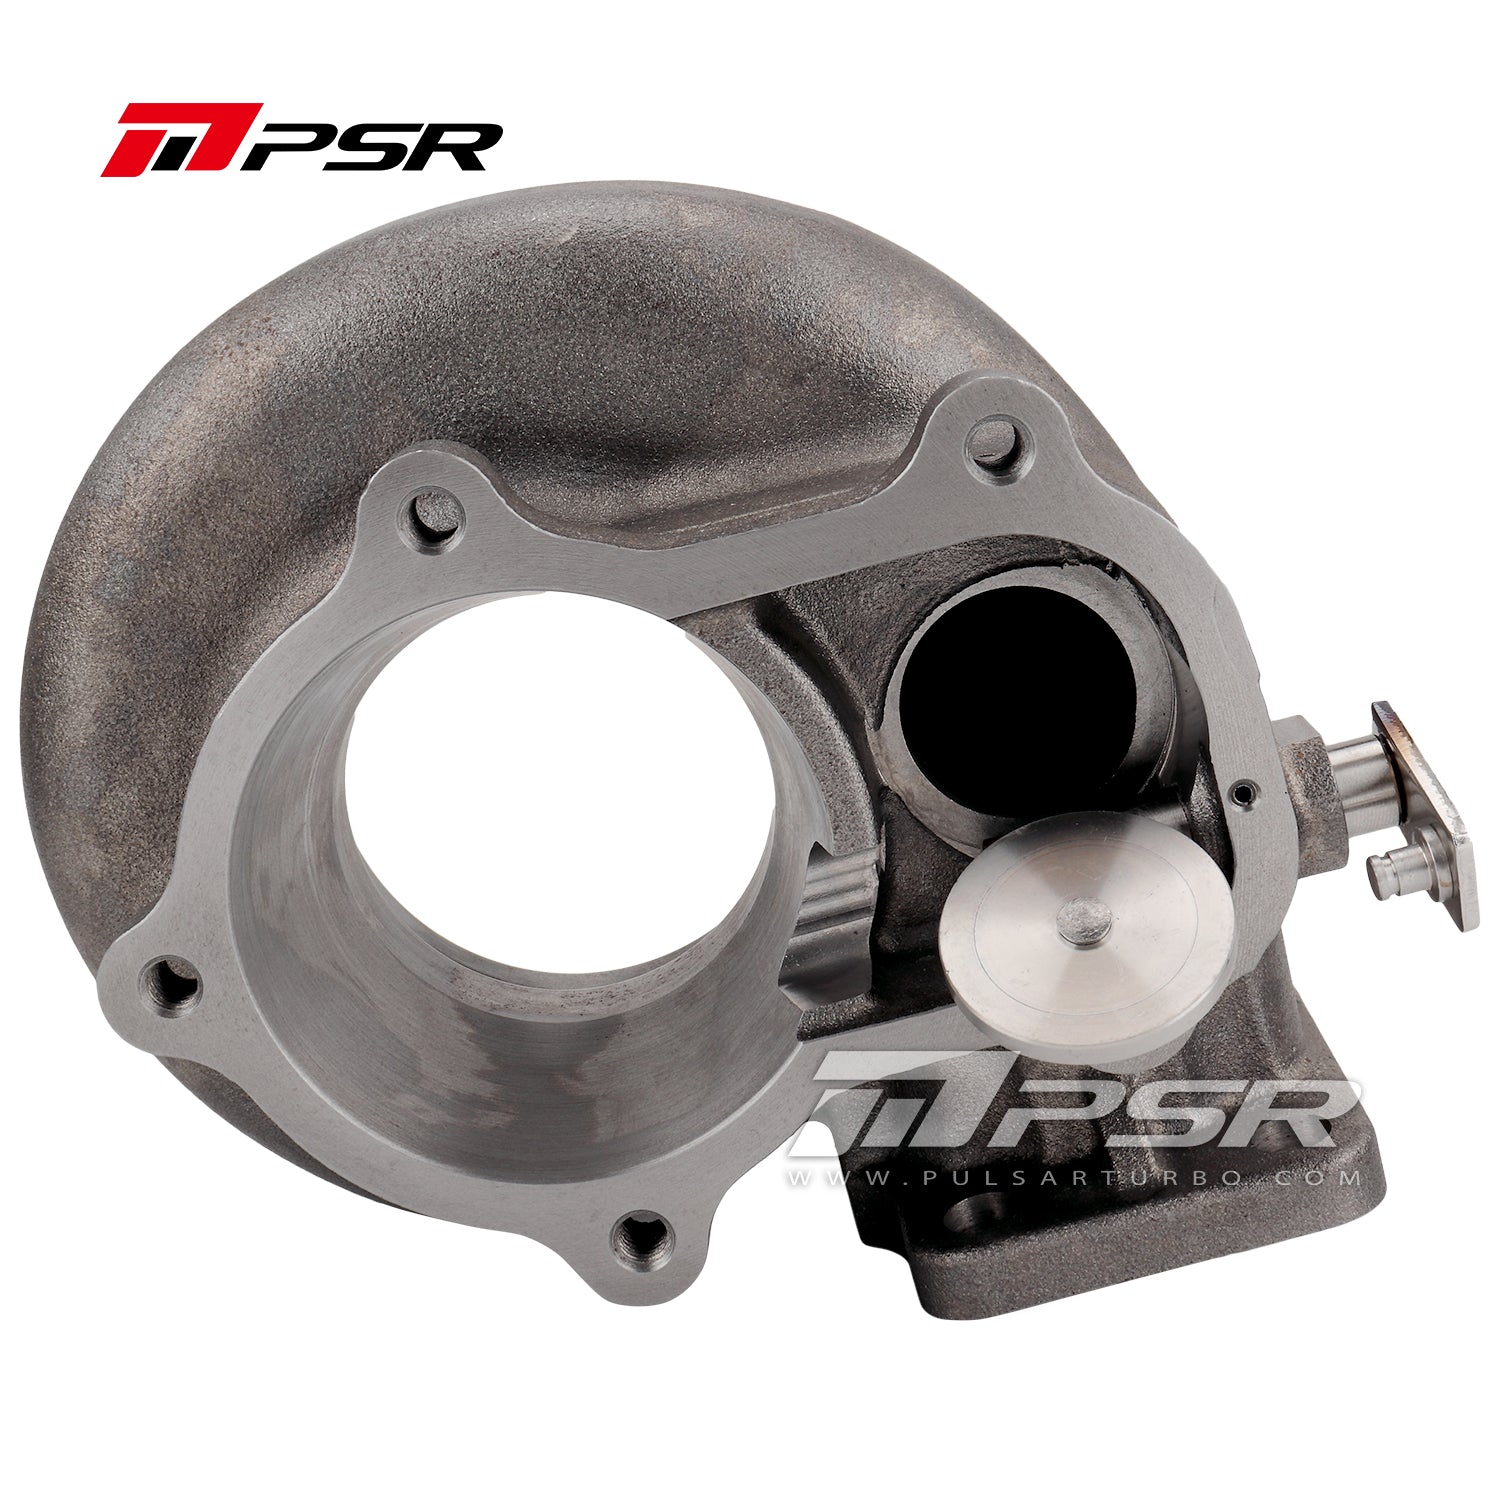 PSR PULSAR Next GEN 6682 for Ford Falcon to replace the factory GT3582 turbo